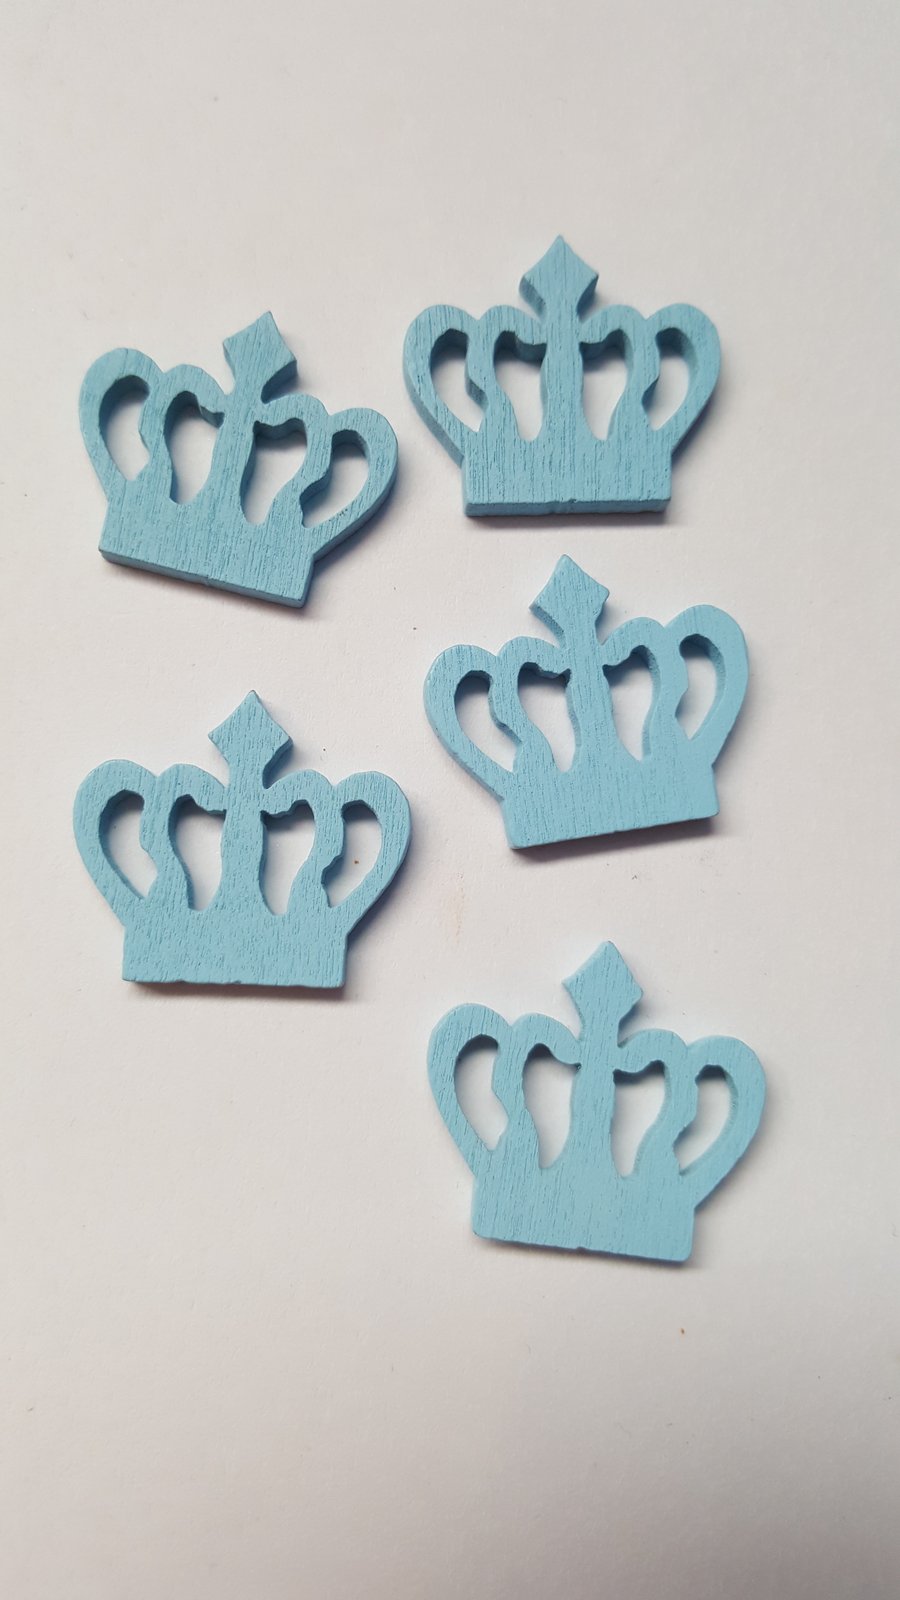 10 x Painted Wooden Shapes - 23mm - Crown - Pale Blue 